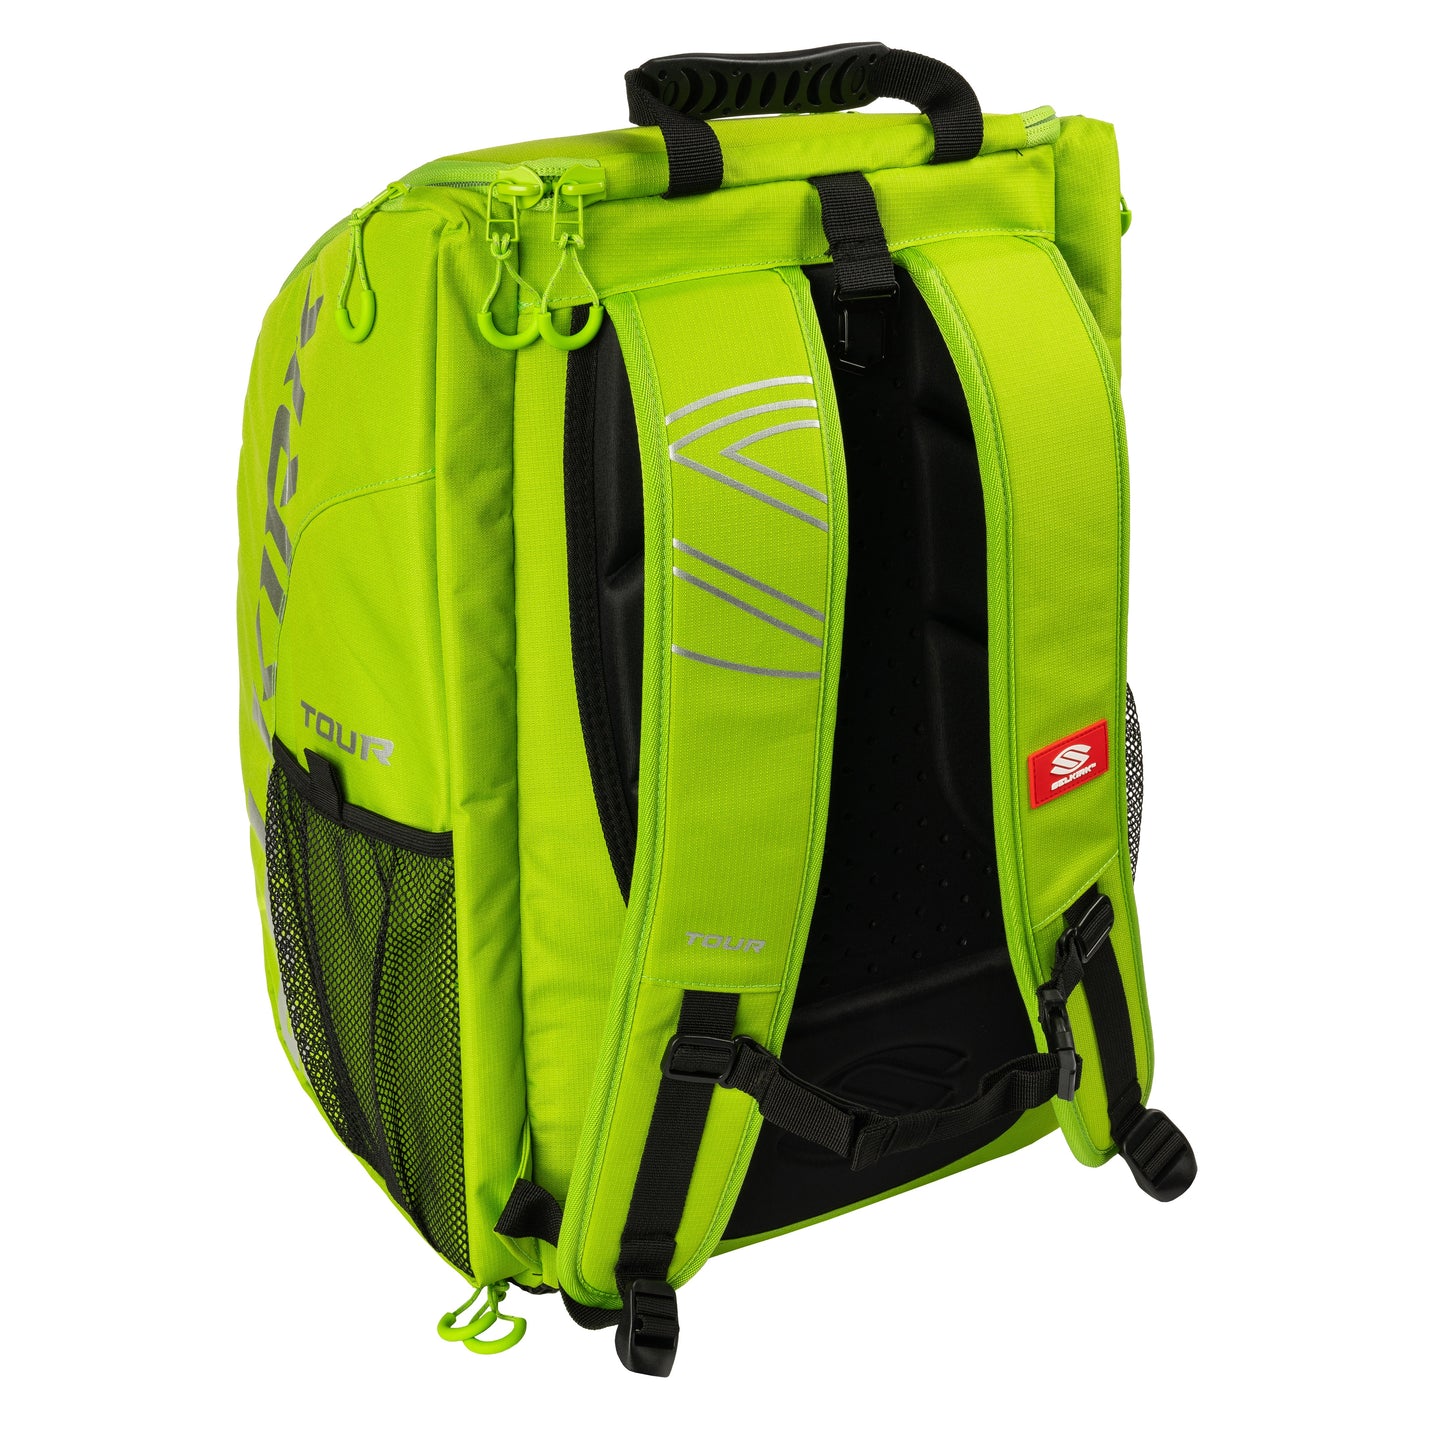 A Selkirk Core Series Tour Backpack Pickleball Bag with a black strap.